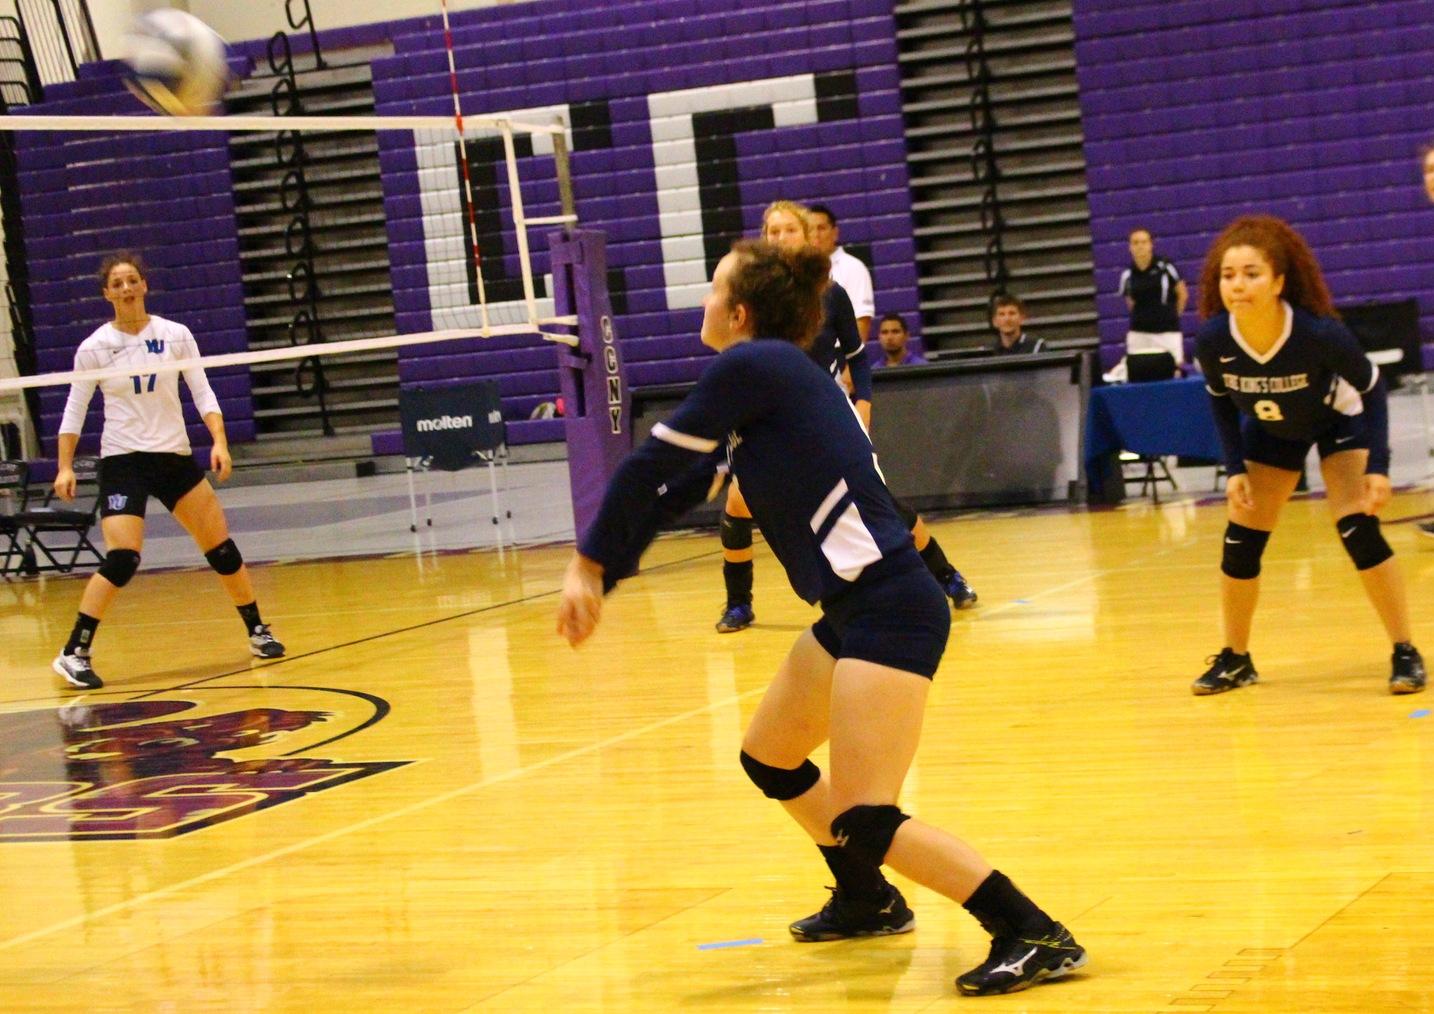 Lady Lions Volleyball Win 6th Straight Match